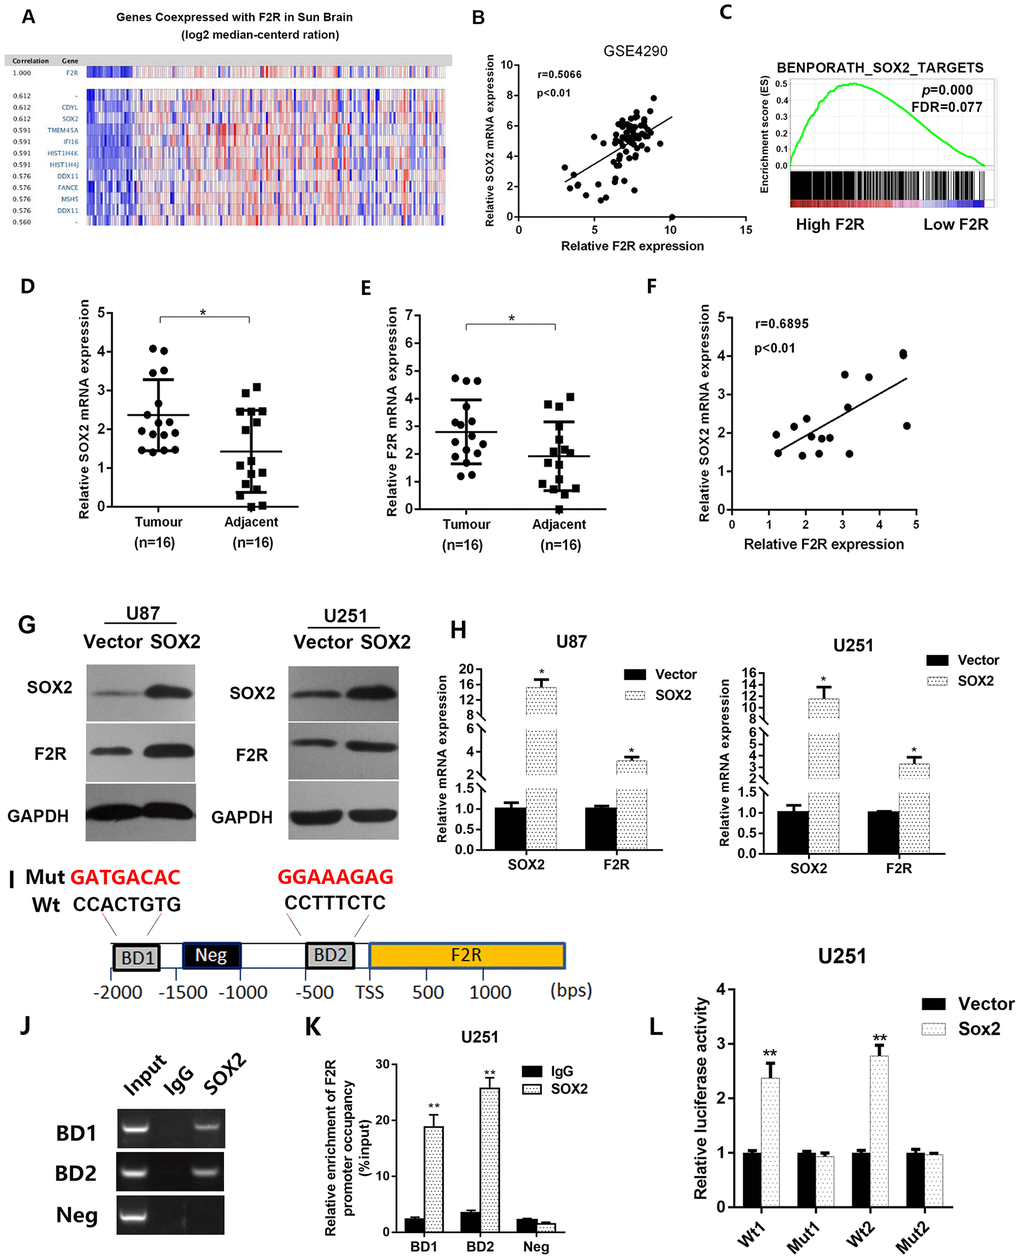 SOX2 transcriptionally activates F2R expression. (A) By resorting to the data collected from Sun glioblastoma dataset (GSE4290), we picked out top-ranked genes co-expressed with F2R. (B) The co-expression of SOX2 and F2R was validated using data from GSE4290. Correlation coefficient r=0.5066, PC) GSEA analysis based on the TCGA glioma database revealed that F2R was associated with SOX2 targets. (D, E) The mRNA expression level of SOX2 and F2R were detected in 16 paired glioma and adjacent normal tissues using RT-PCR. (F) The correlation of SOX2 and F2R was validated using RT-PCR. Correlation coefficient r=0.6895, PG, H) The protein and mRNA level of F2R were measured under the condition of SOX2 overexpression in U87 and U251 cell lines. (I) Transcription factor online prediction analysis revealed two SOX2 binding site in the promoter region of F2R. A random region without SOX2 binding sites acted as a negative control (Neg). (J, K) ChIP result using anti-IgG antibody and anti-SOX2 antibody. (L) Relative luciferase activity of the control or F2R overexpression glioma cells. All experiments were repeated at least three times. Data are presented as mean ± SEM. *P